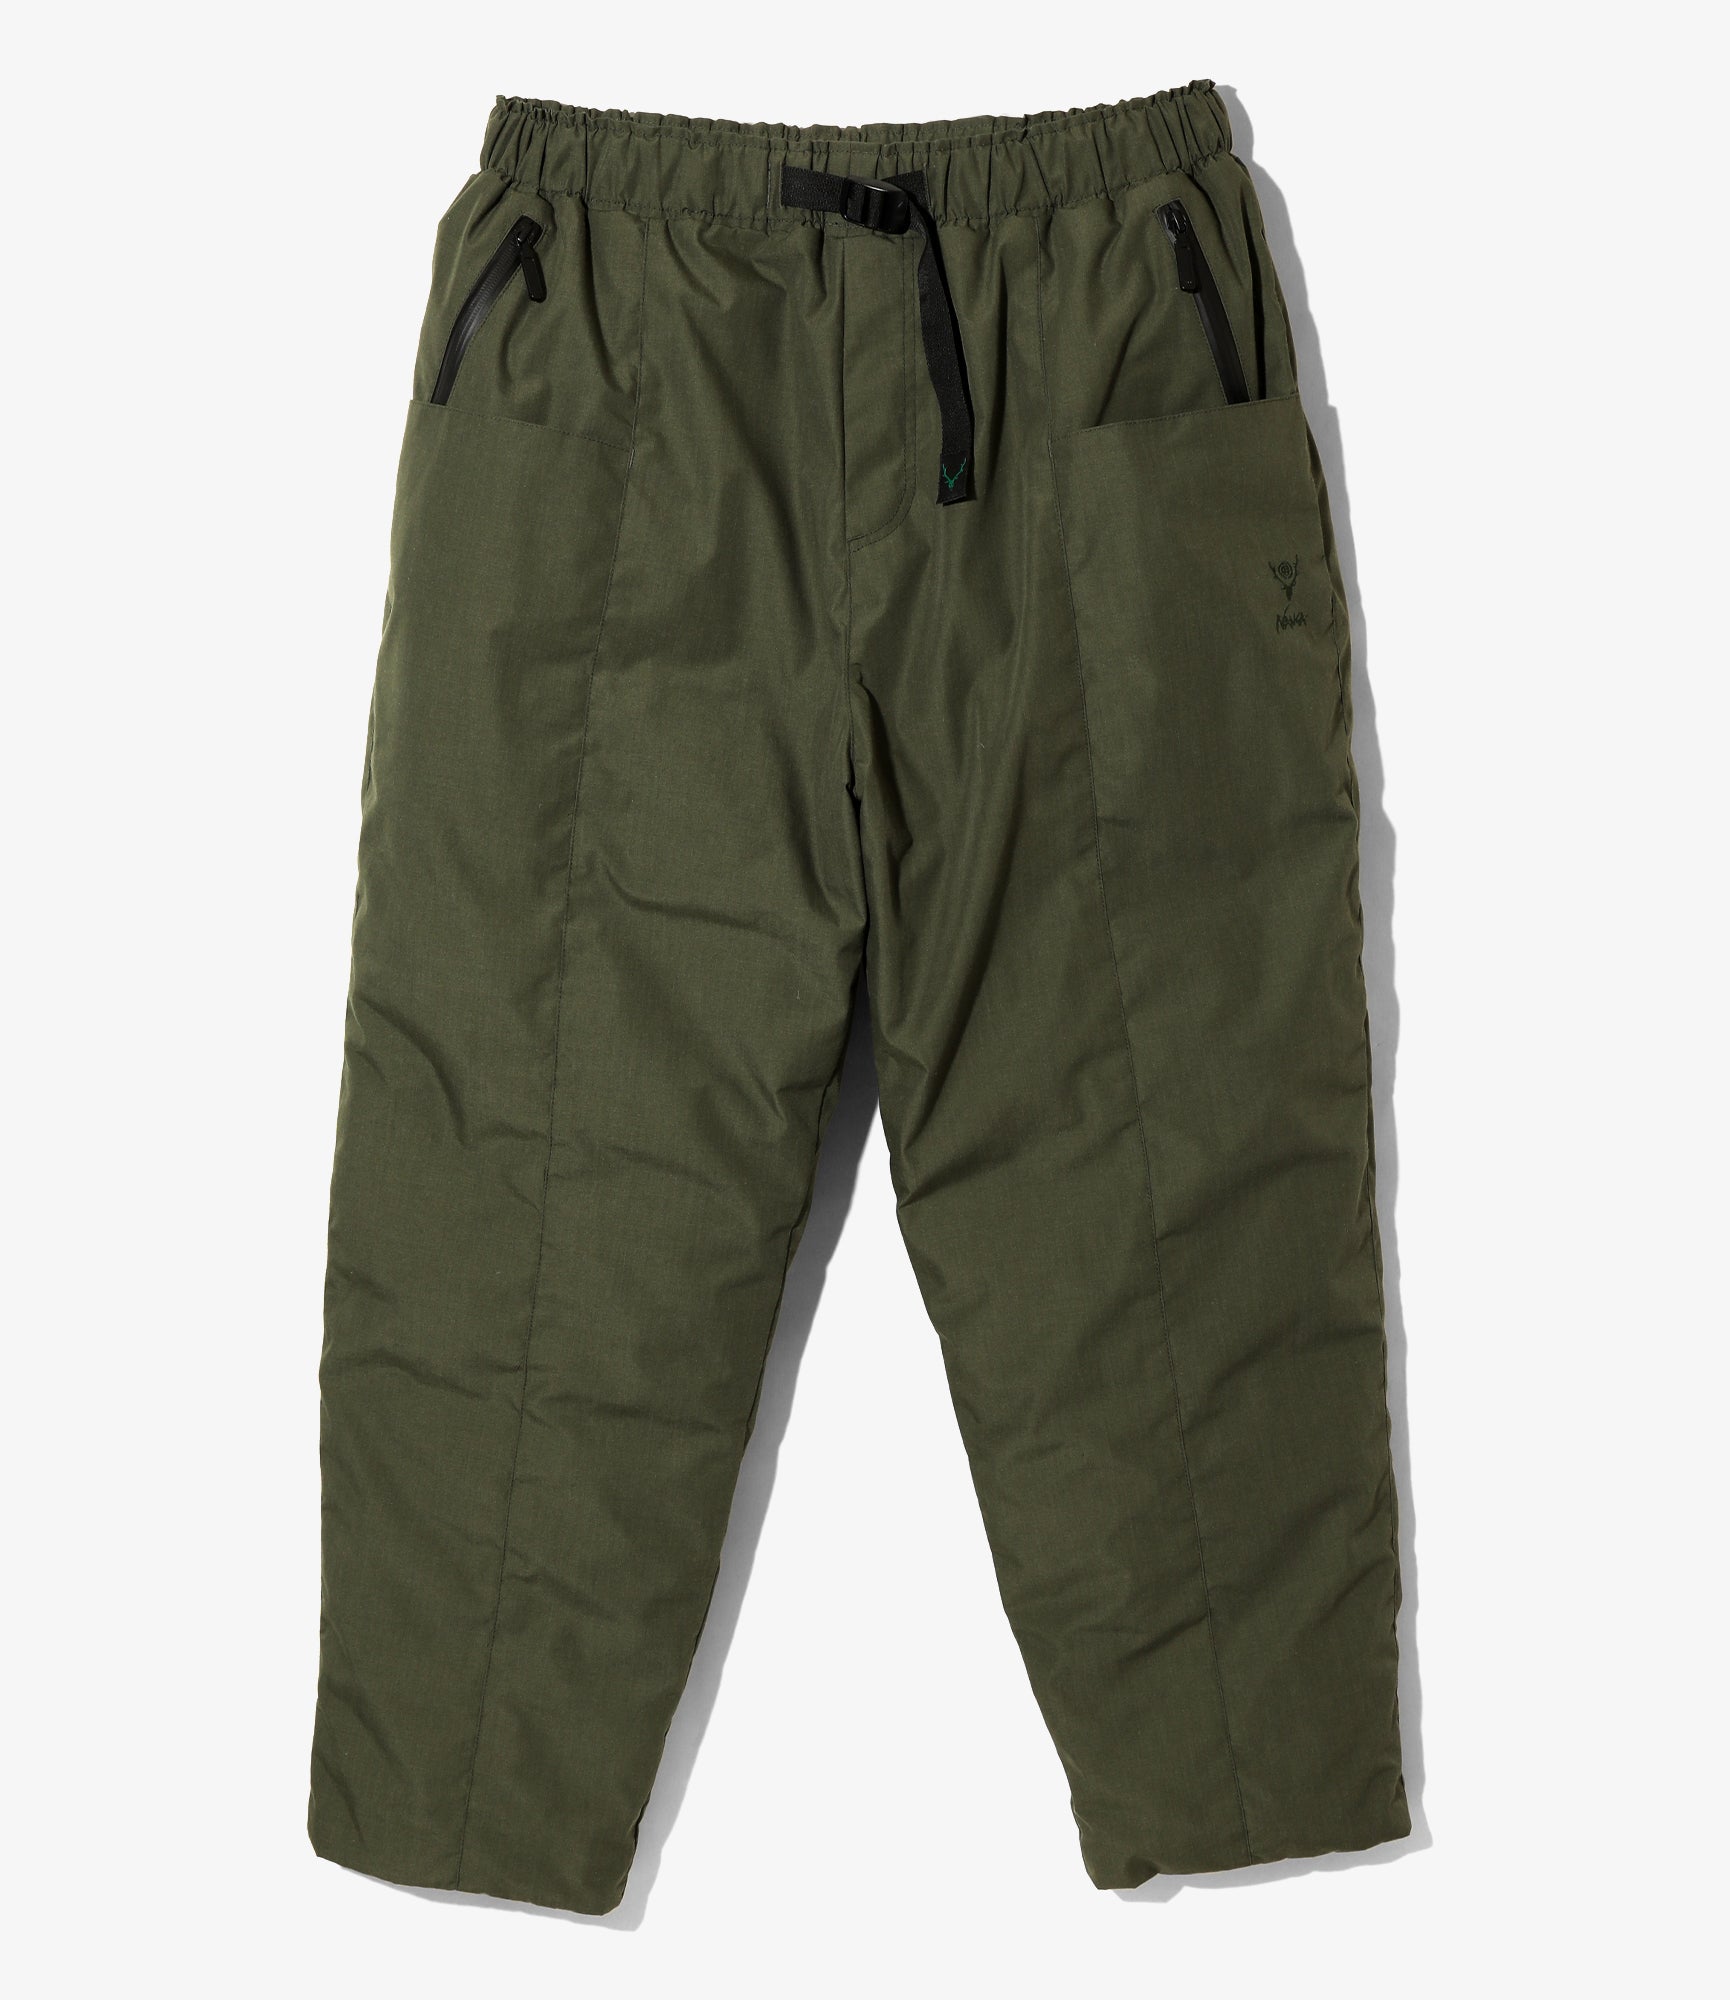 South2 West8 x Nanga - Belted C.S. Pant - Olive - Flame Resistant